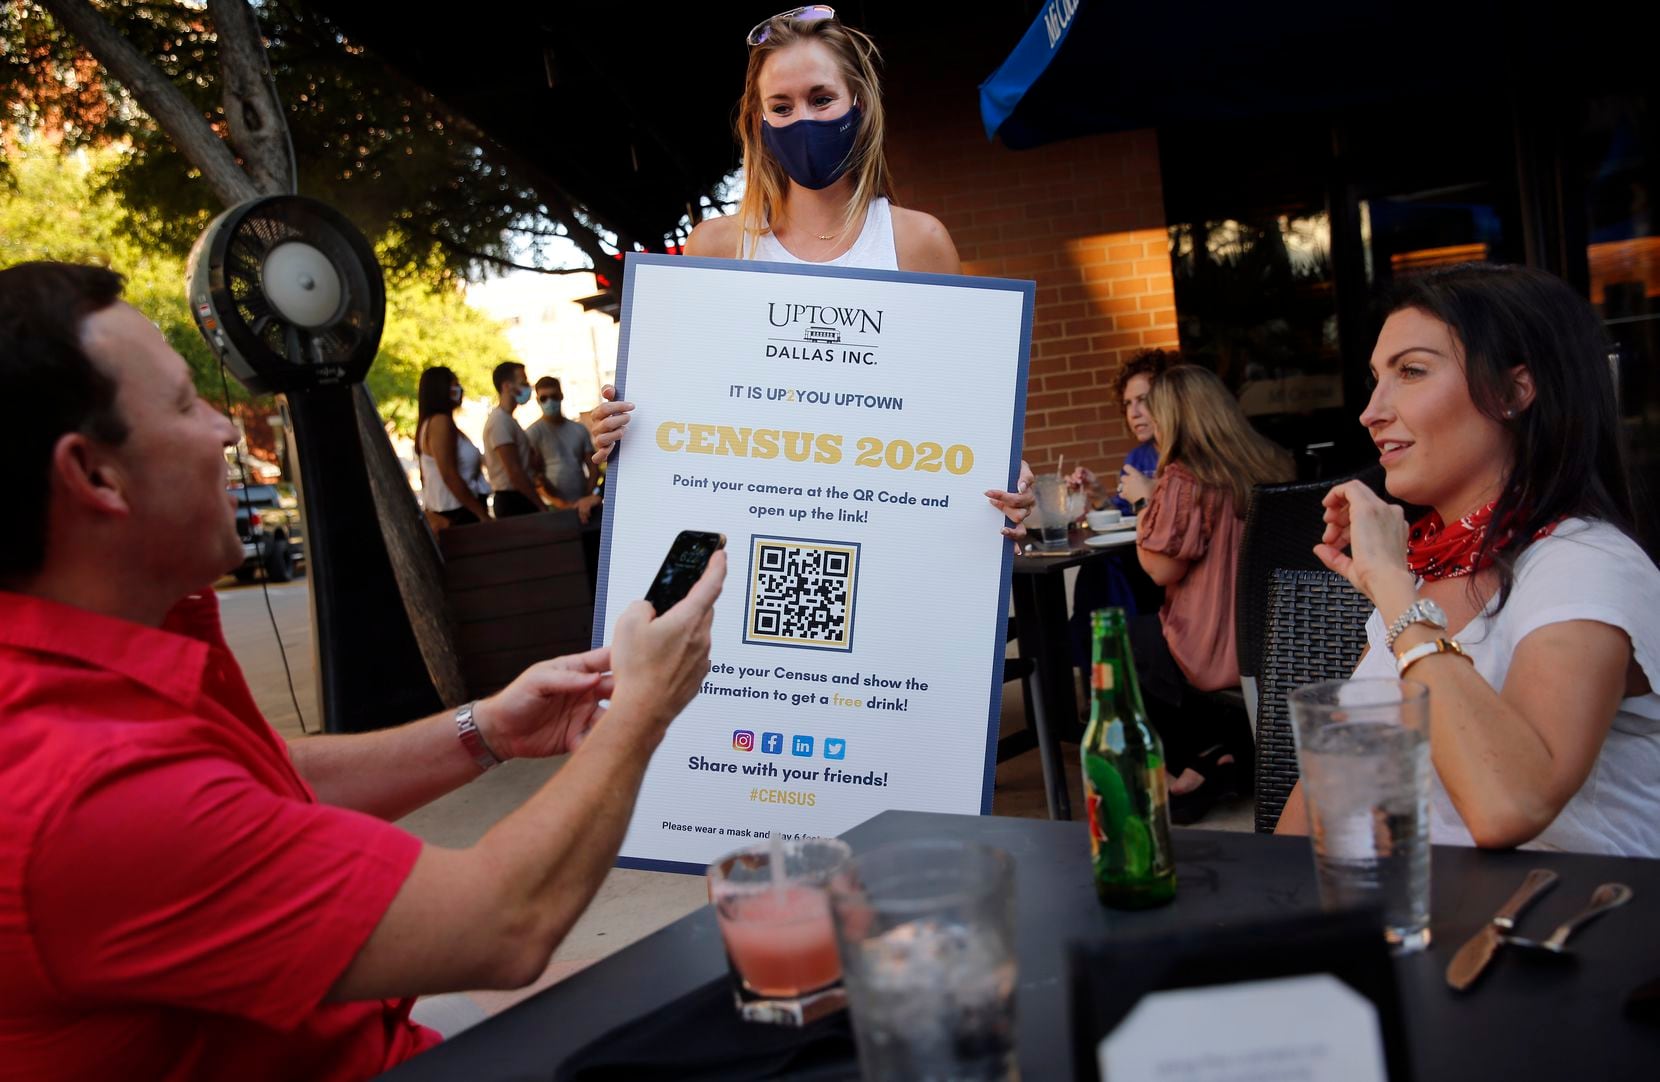 Uptown Dallas volunteer Christie Myers (center) encourages Darren Houck (left) and his friend Michelle Sloan (right) to register with Census 2020 outside Mi Cocina at West Village shopping center in Dallas, Thursday, August 20, 2020. Those who registered received free drinks onsite from Bubble Bus Co. (Tom Fox/The Dallas Morning News)